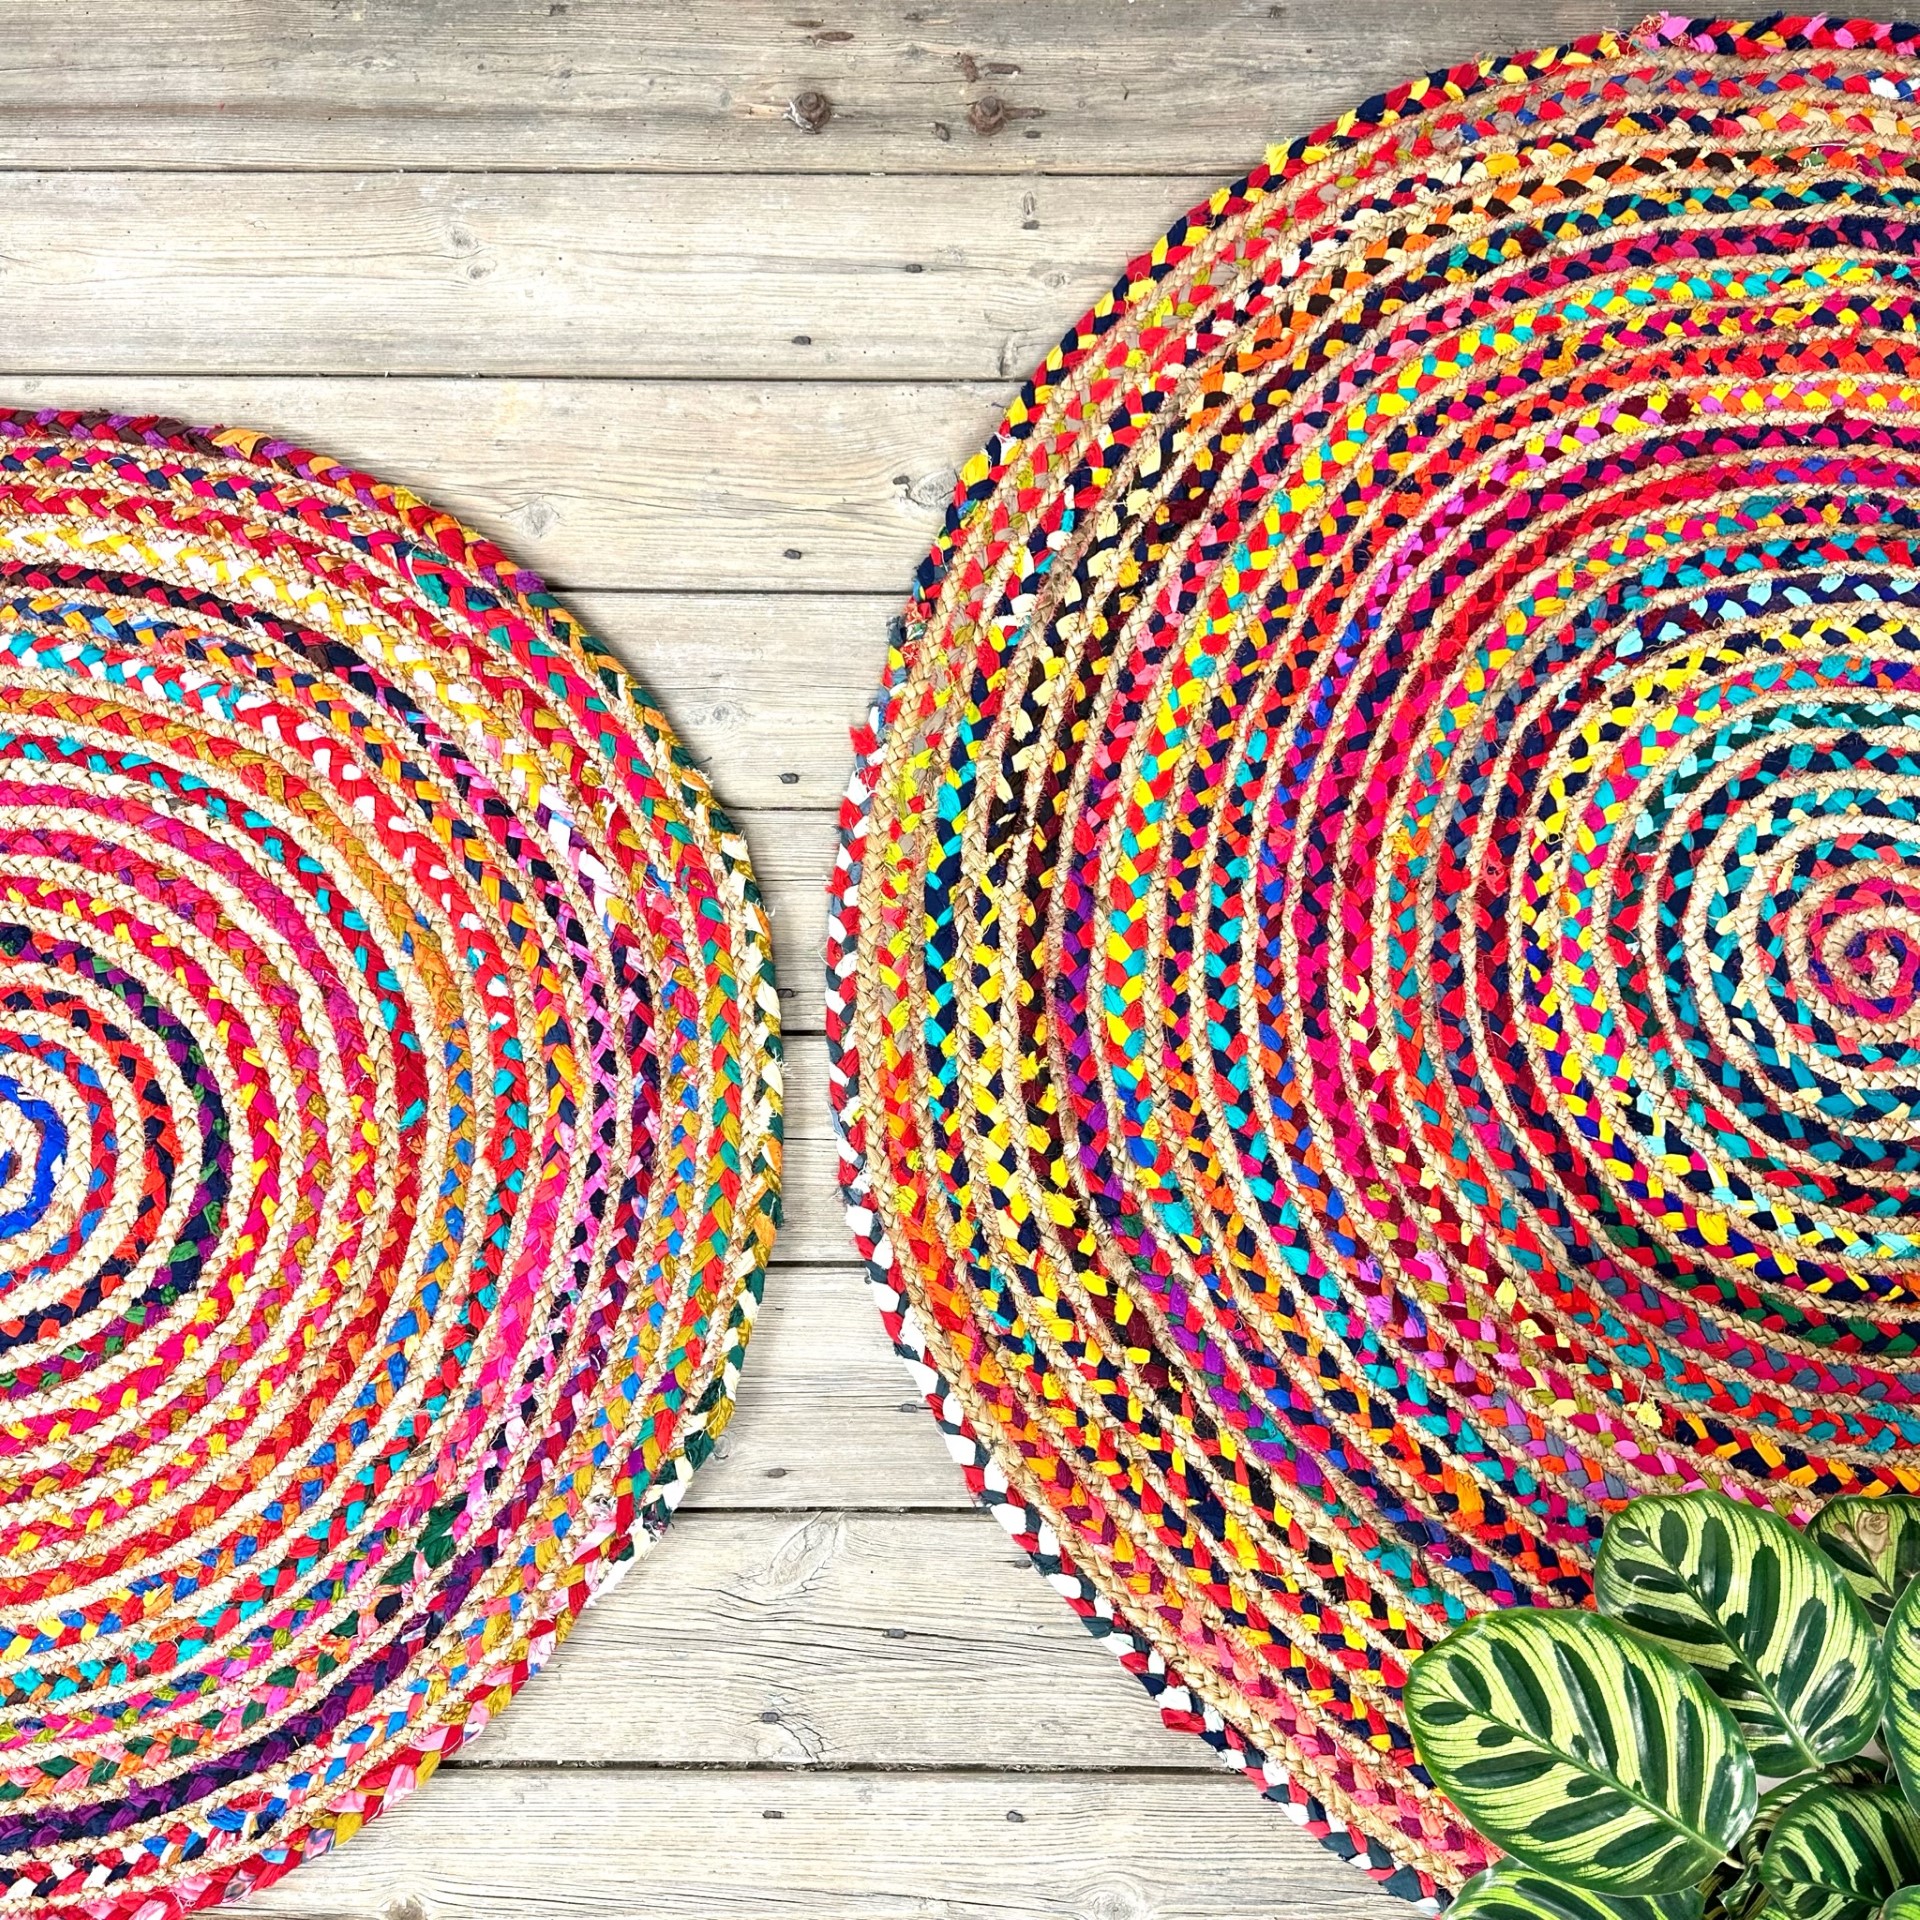 Round Multi-Coloured Cotton and Jute Braided Rag Rug Recycled Materials 4 Sizes Fair Trade GoodWeave